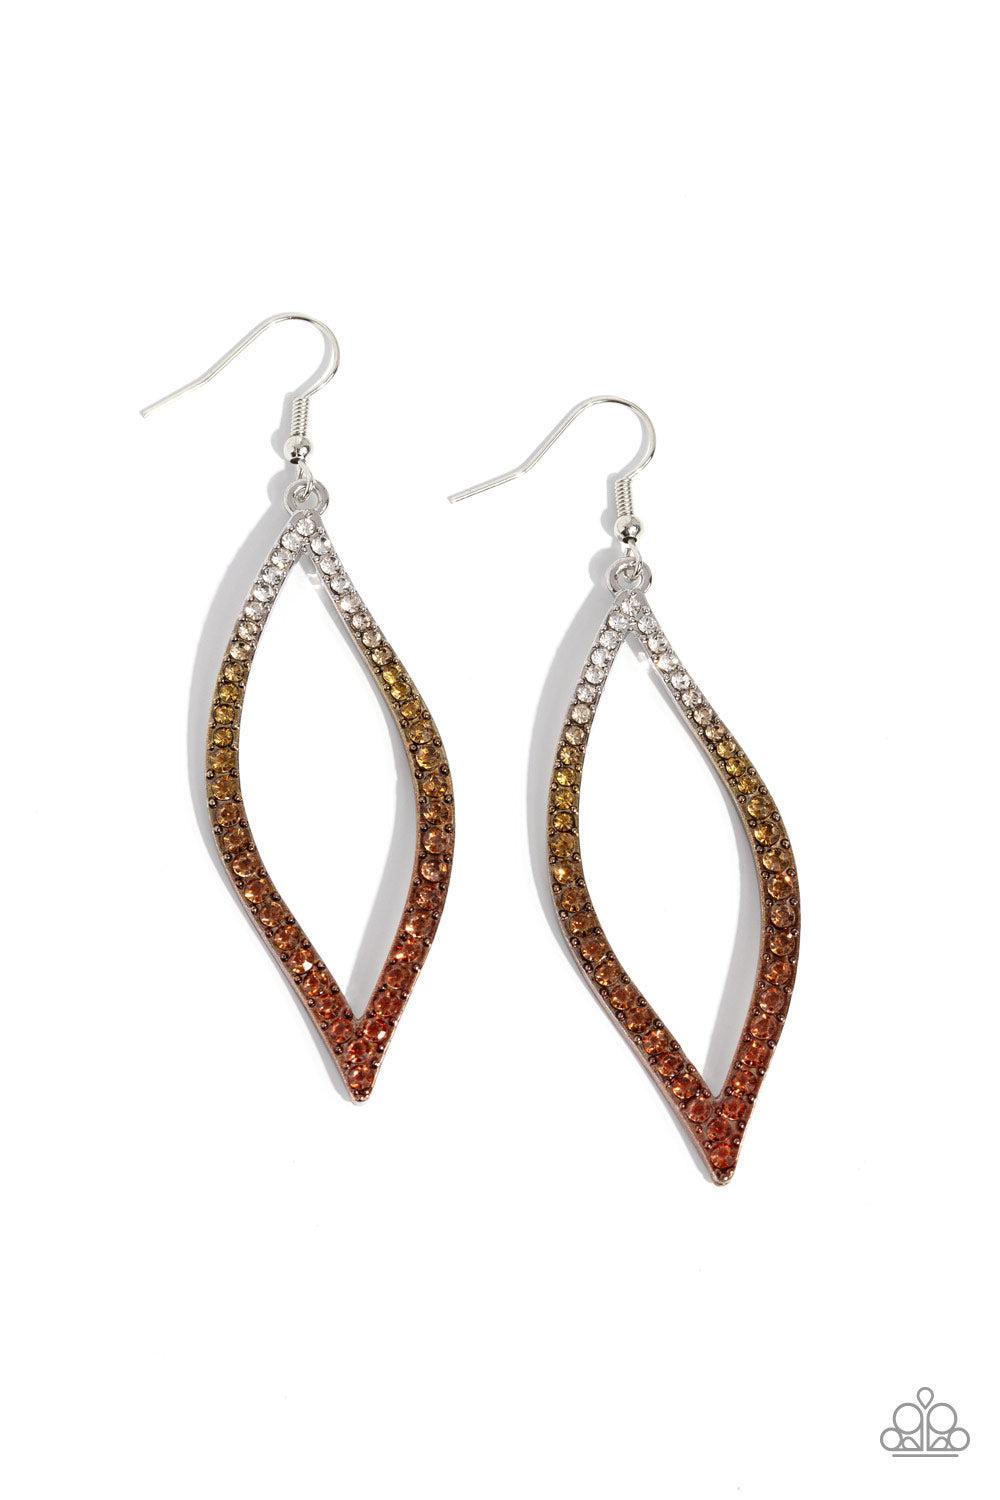 Admirable Asymmetry Multi White &amp; Copper Ombre Earrings - Paparazzi Accessories- lightbox - CarasShop.com - $5 Jewelry by Cara Jewels